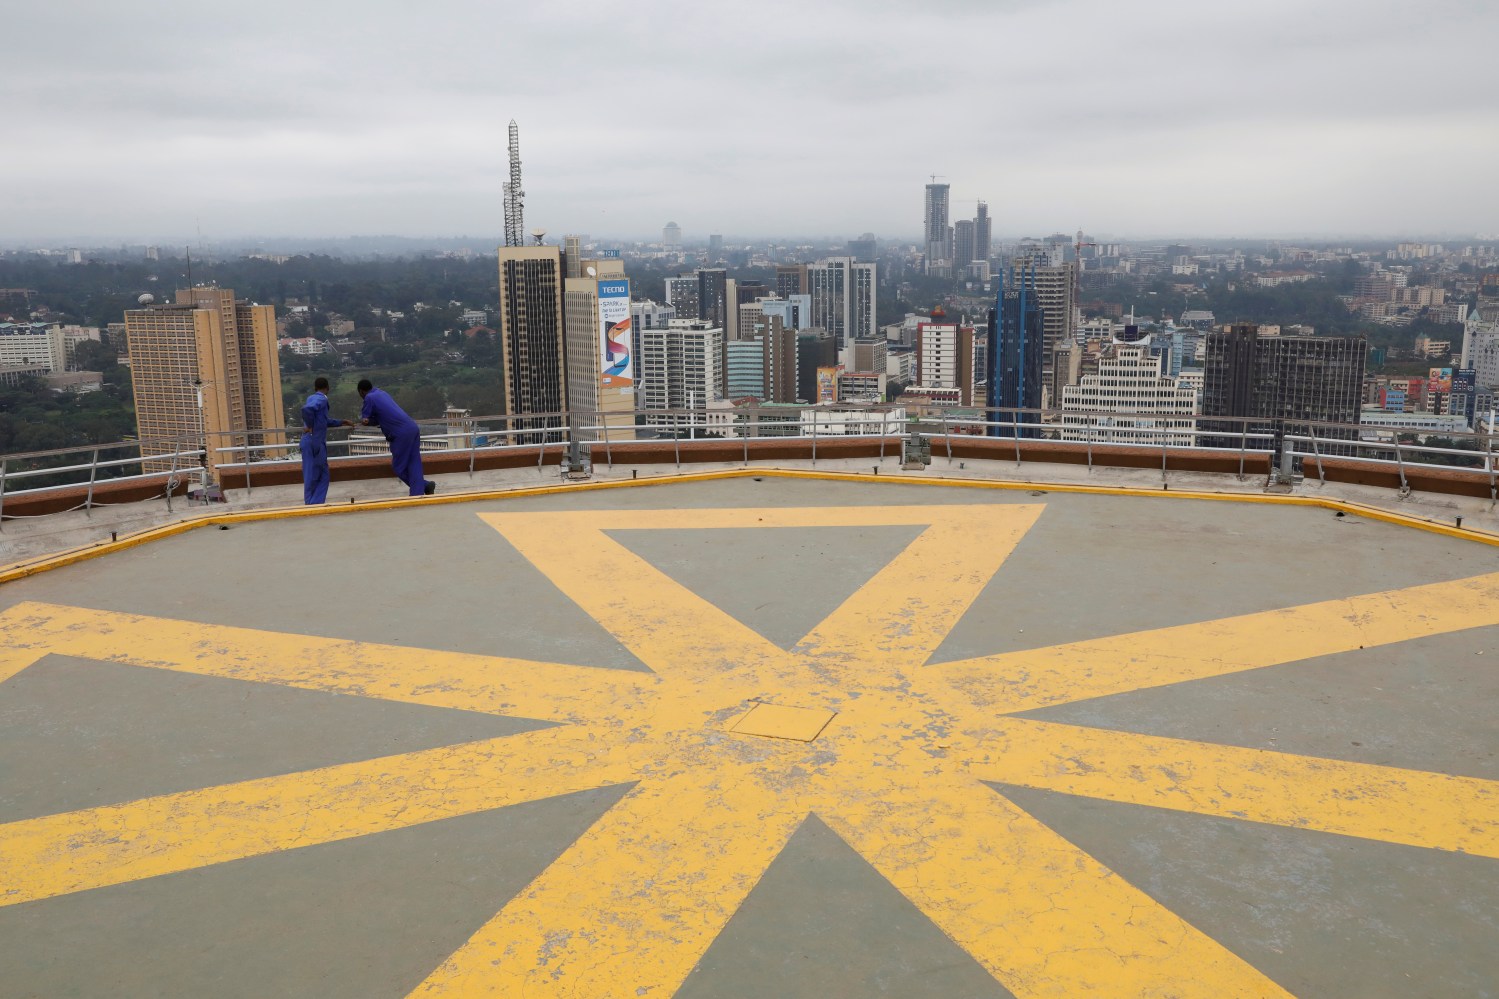 Men look at the Nairobi skyline from observation point on the top of the Kenyatta International Convention Centre in Nairobi, Kenya, June 21, 2019. REUTERS/Baz Ratner - RC1D930C2460